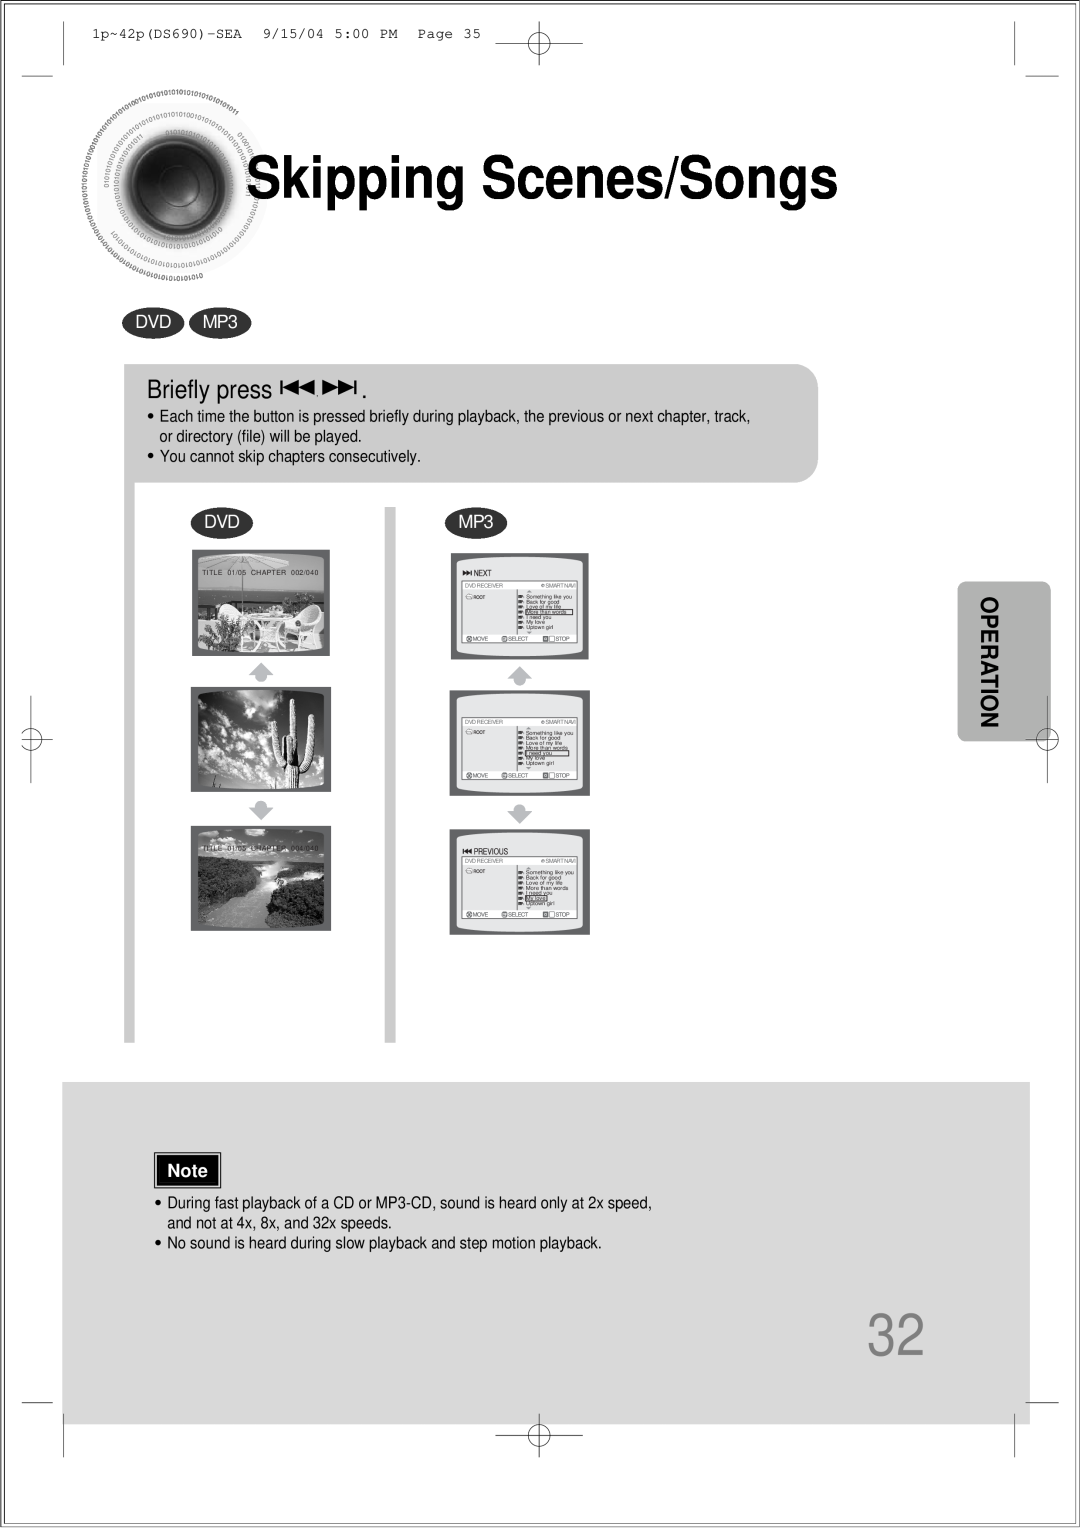 Samsung HT-DS690 instruction manual SkippingScenes/Songs, Briefly press, Operation, DVD MP3 